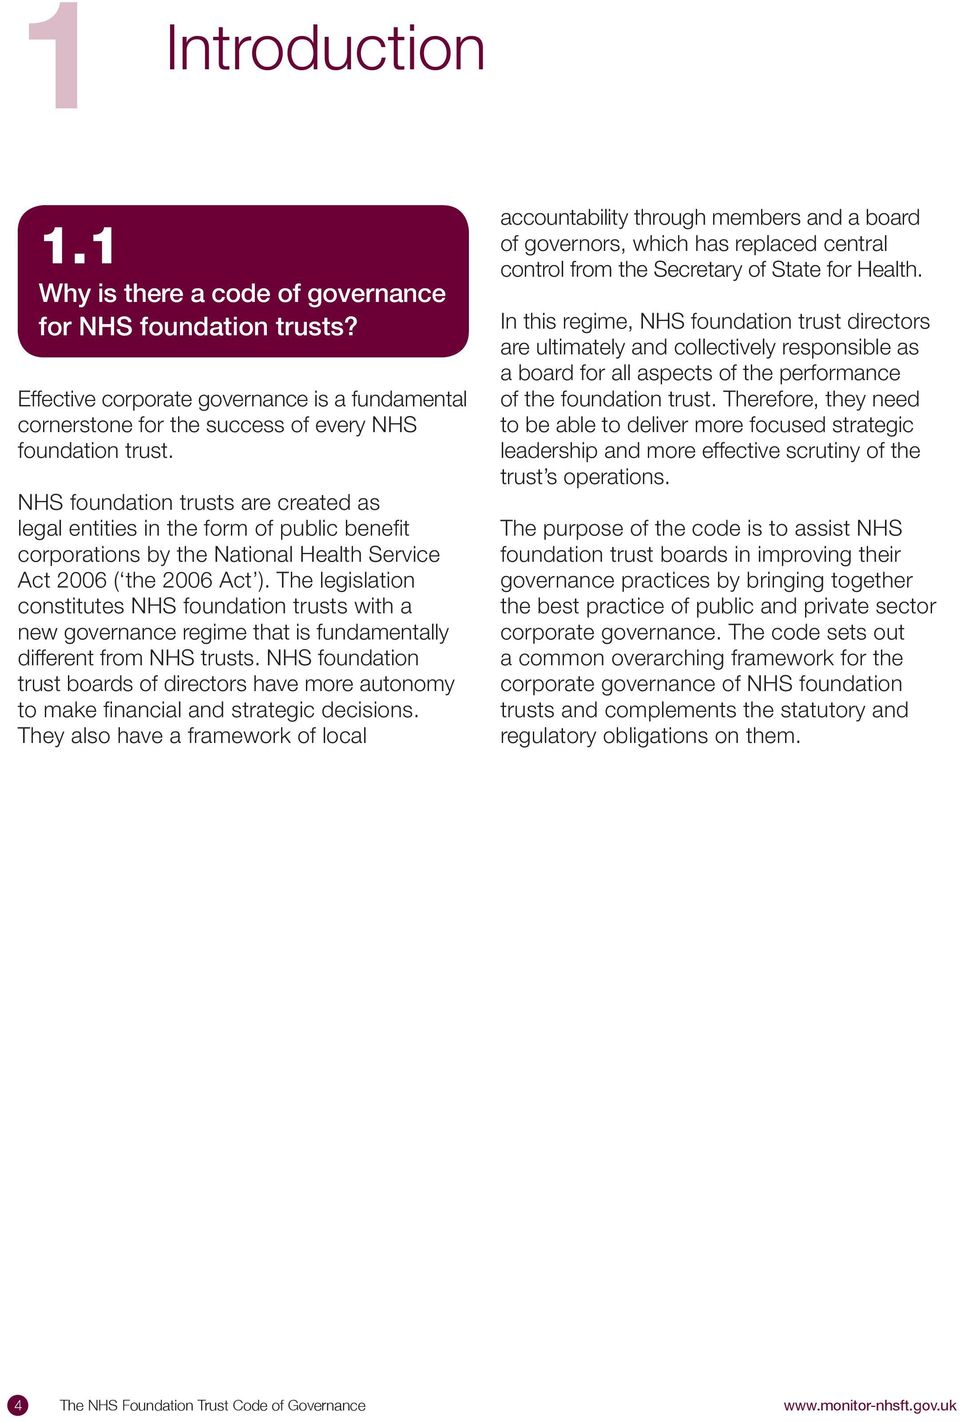 The legislation constitutes NHS foundation trusts with a new governance regime that is fundamentally different from NHS trusts.